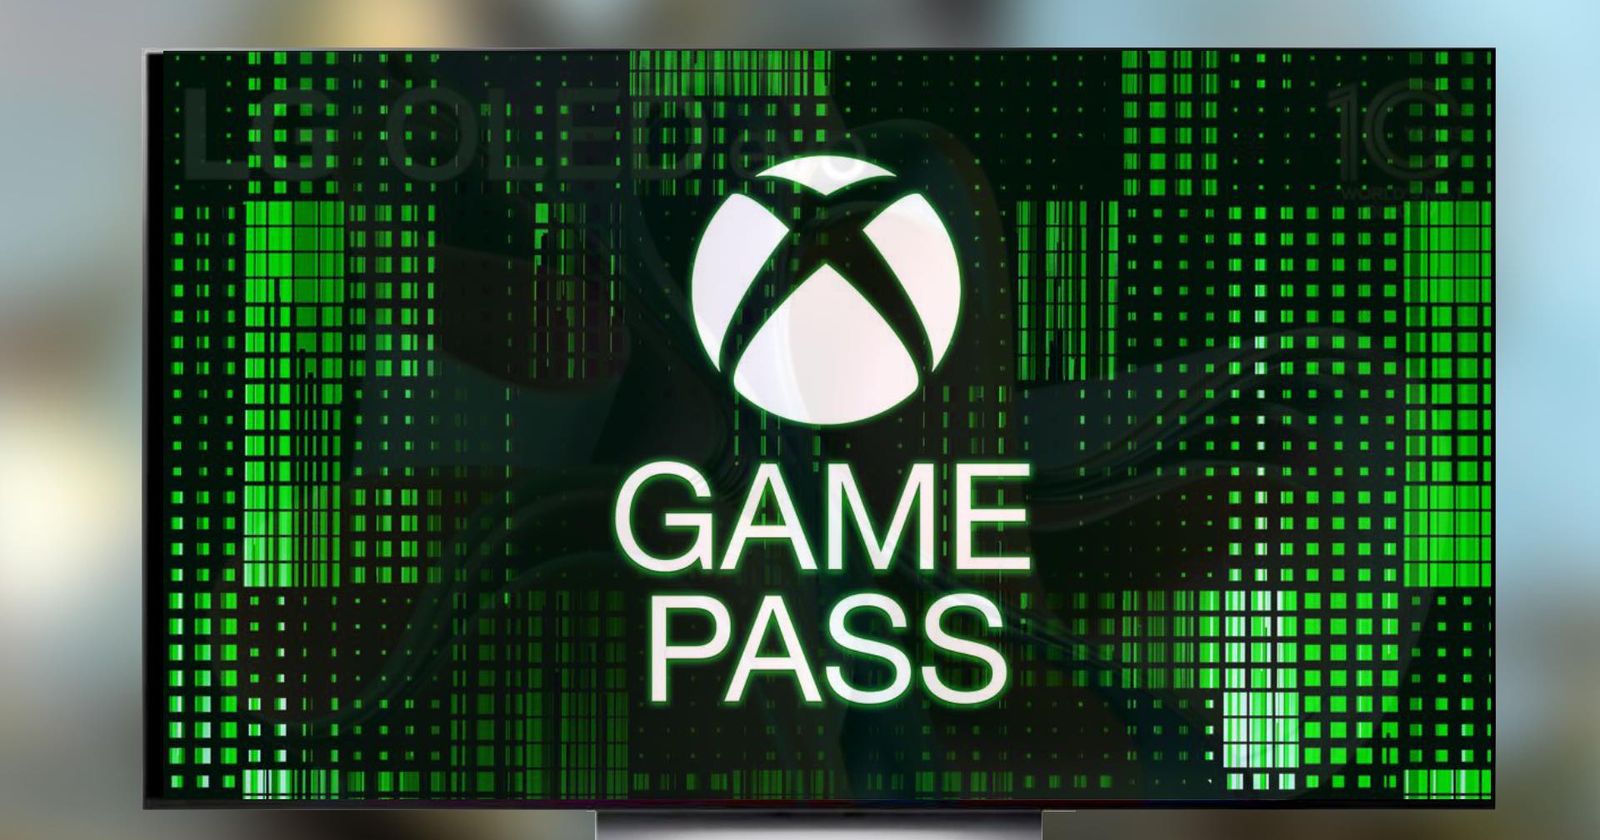 How to use Xbox Game Pass on LG TVs without a console